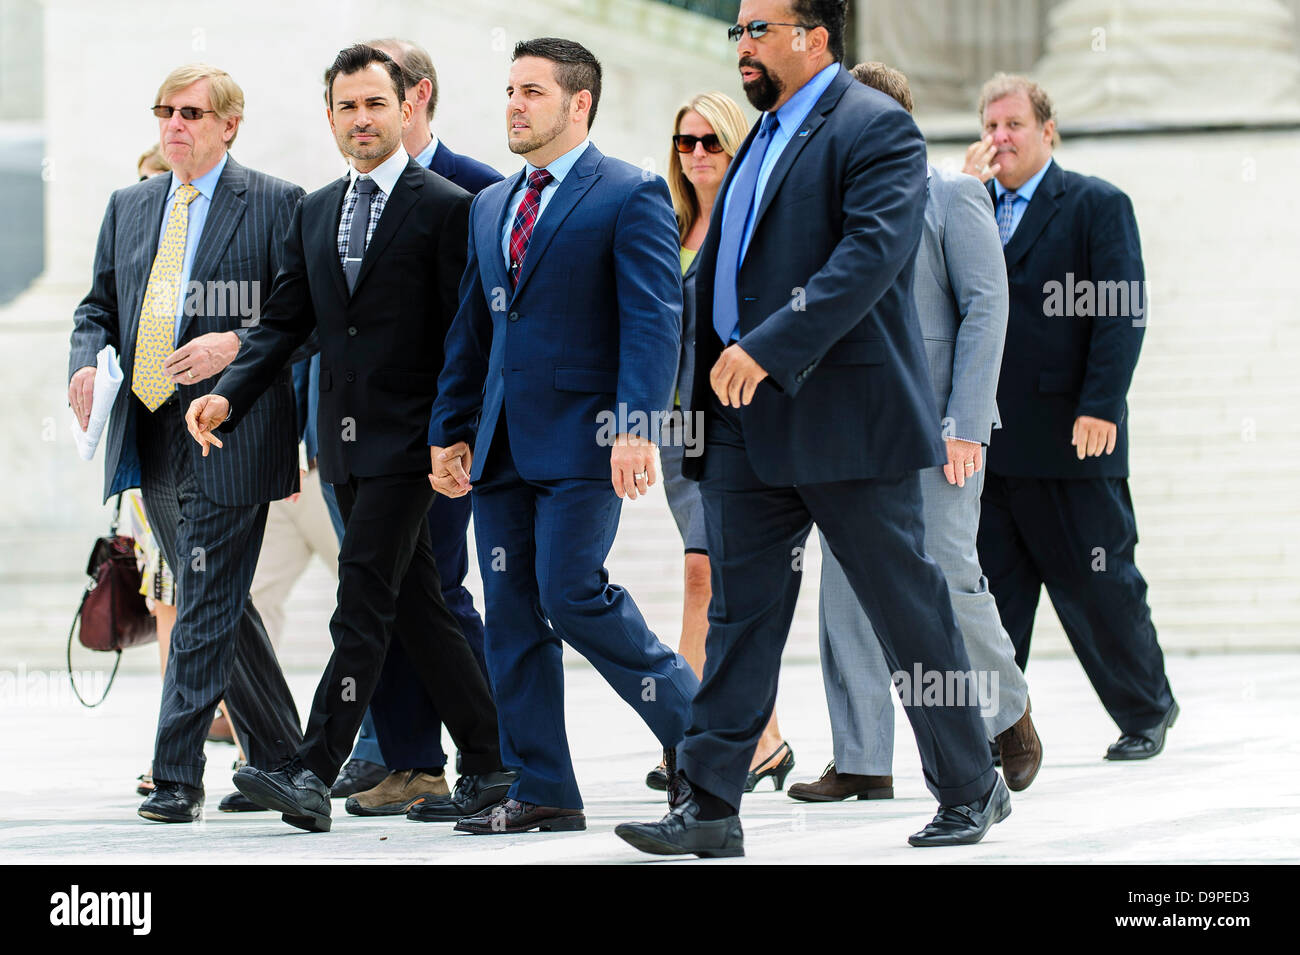 Washington, District of Columbia, USA. 24th June, 2013. Propositon 8 plaintiffs Paul Katami (second from left) and Jeffrey Zarrillo hold hands as they leave the U.S. Supreme Court in Washington, D.C. on Monday. The Court did not rule on the much awaited DOMA and Prop. 8 cases but did affirm the use of race in the admissions process at colleges and universities but made it harder for institutions to use such policies to achieve diversity. Credit: Pete Marovich/ZUMAPRESS.com/Alamy Live News Stock Photo